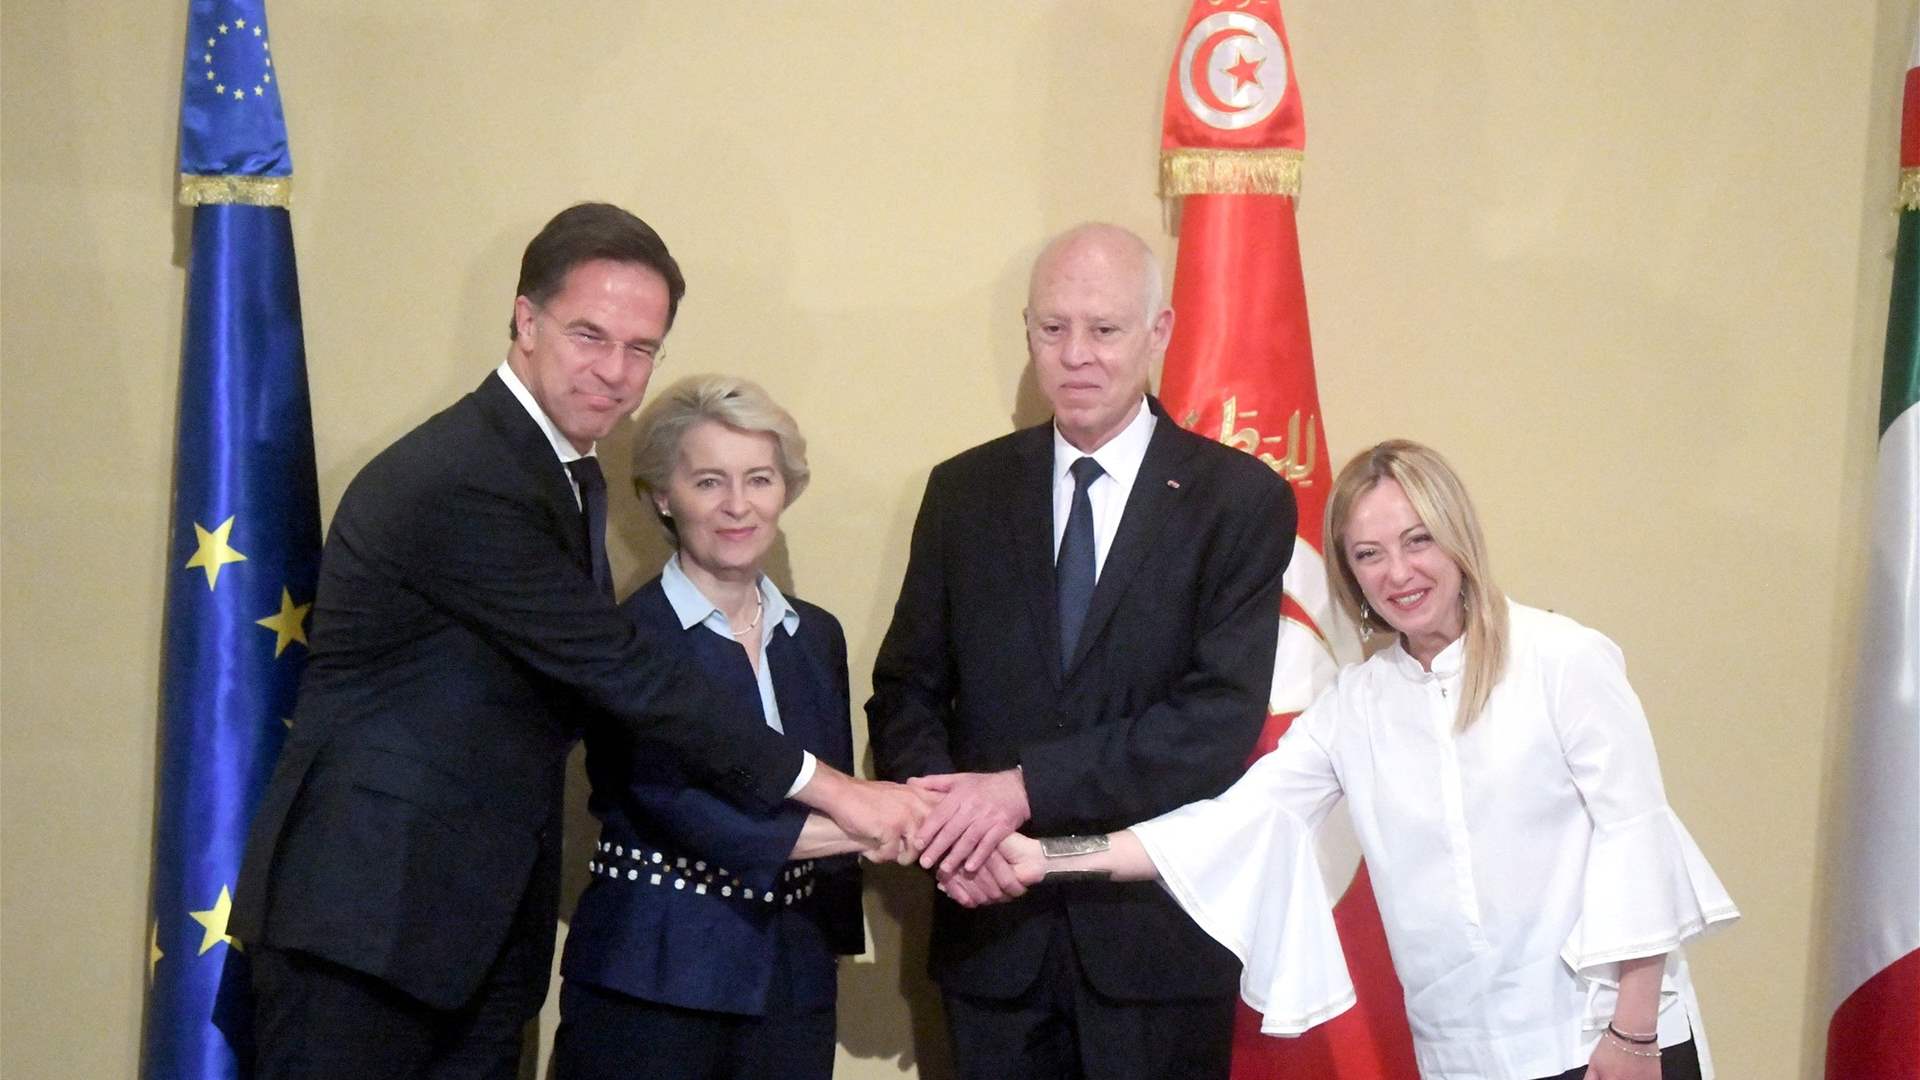 Tunisia and EU sign &quot;strategic partnership&quot; agreement on economy and migration